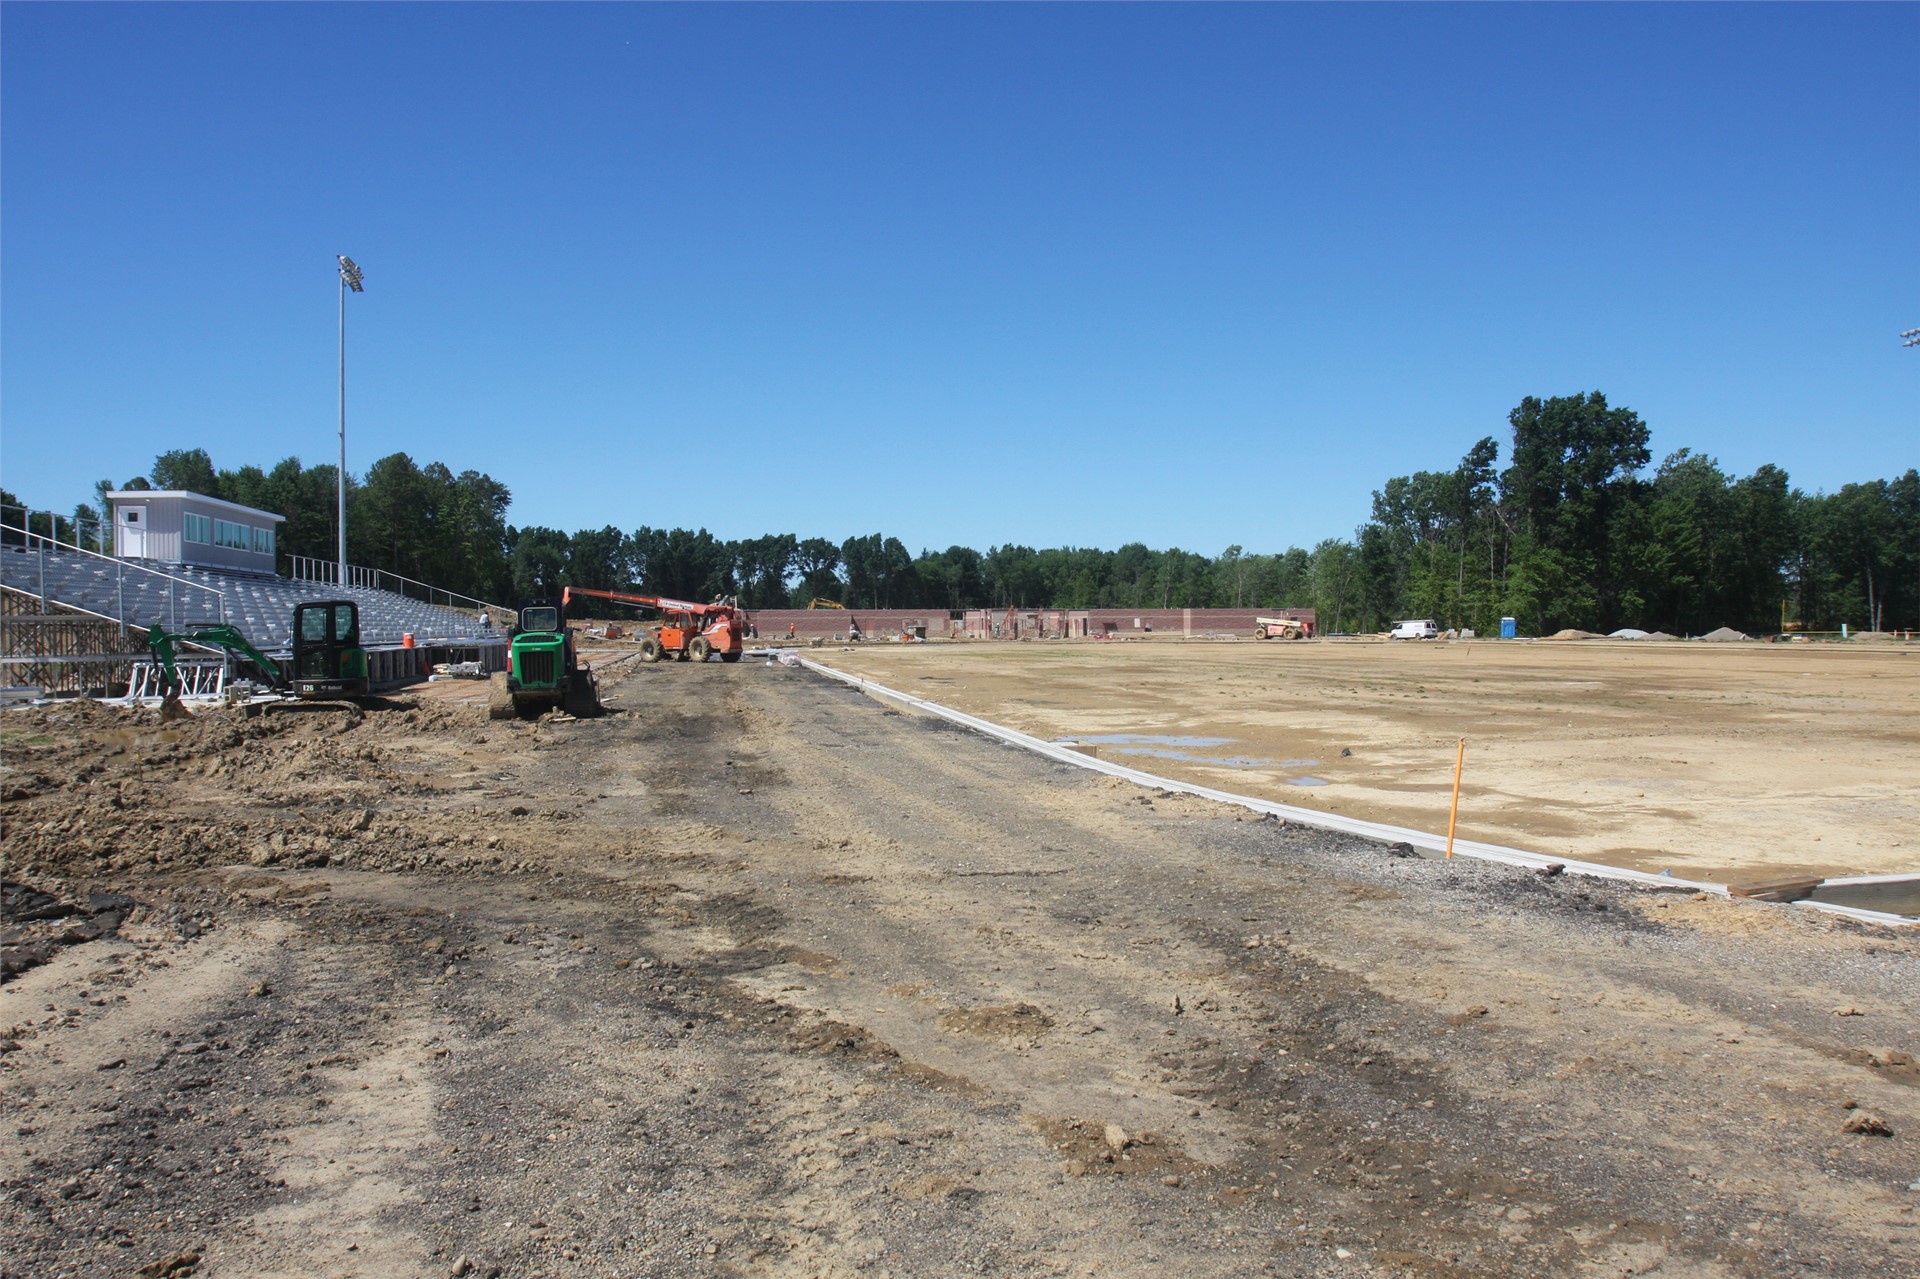 View of home sideline/stands